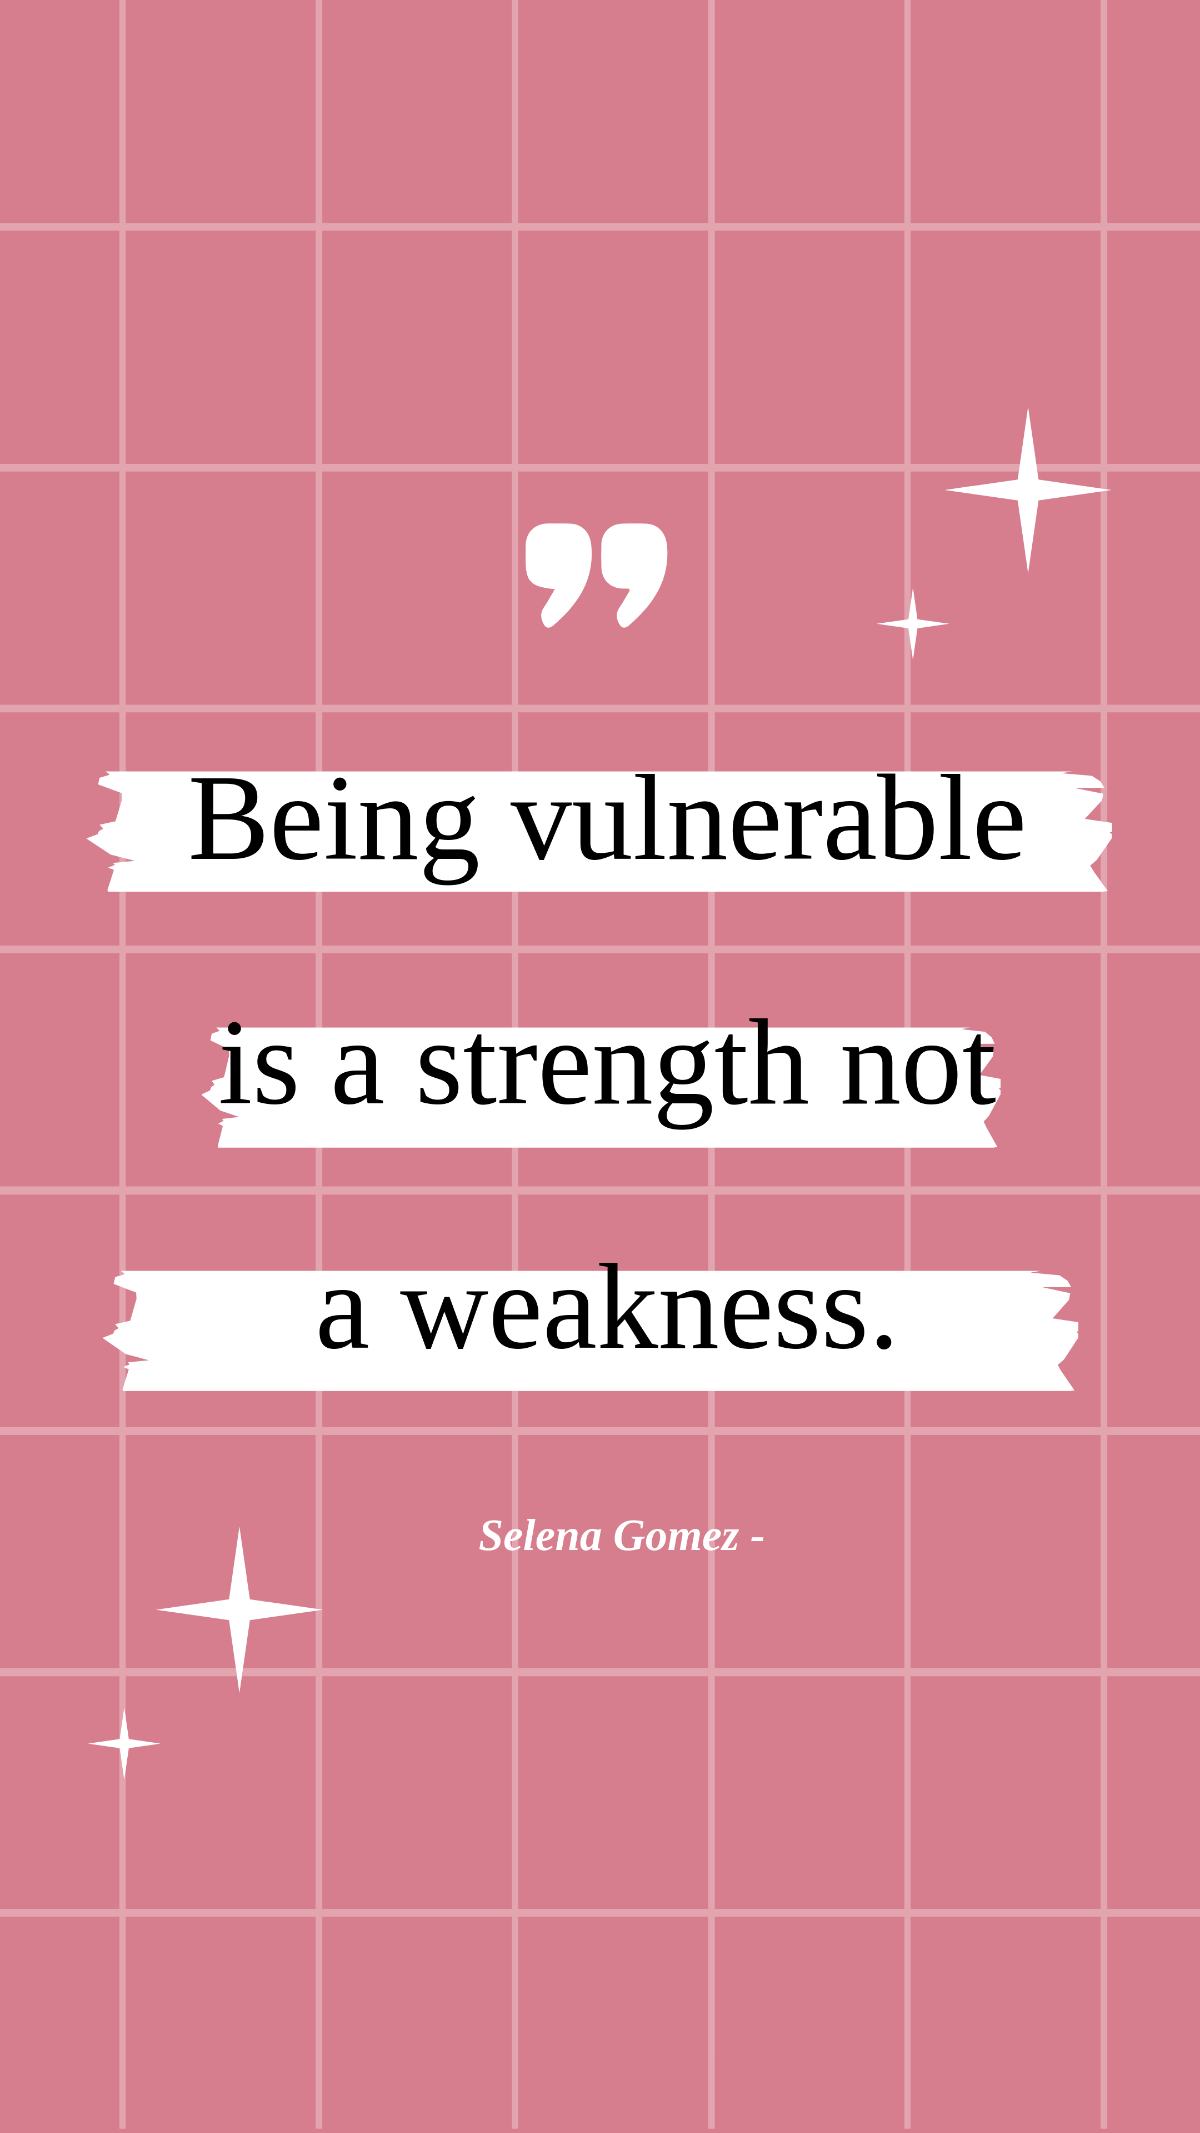 Selena Gomez - Being vulnerable is a strength not a weakness.